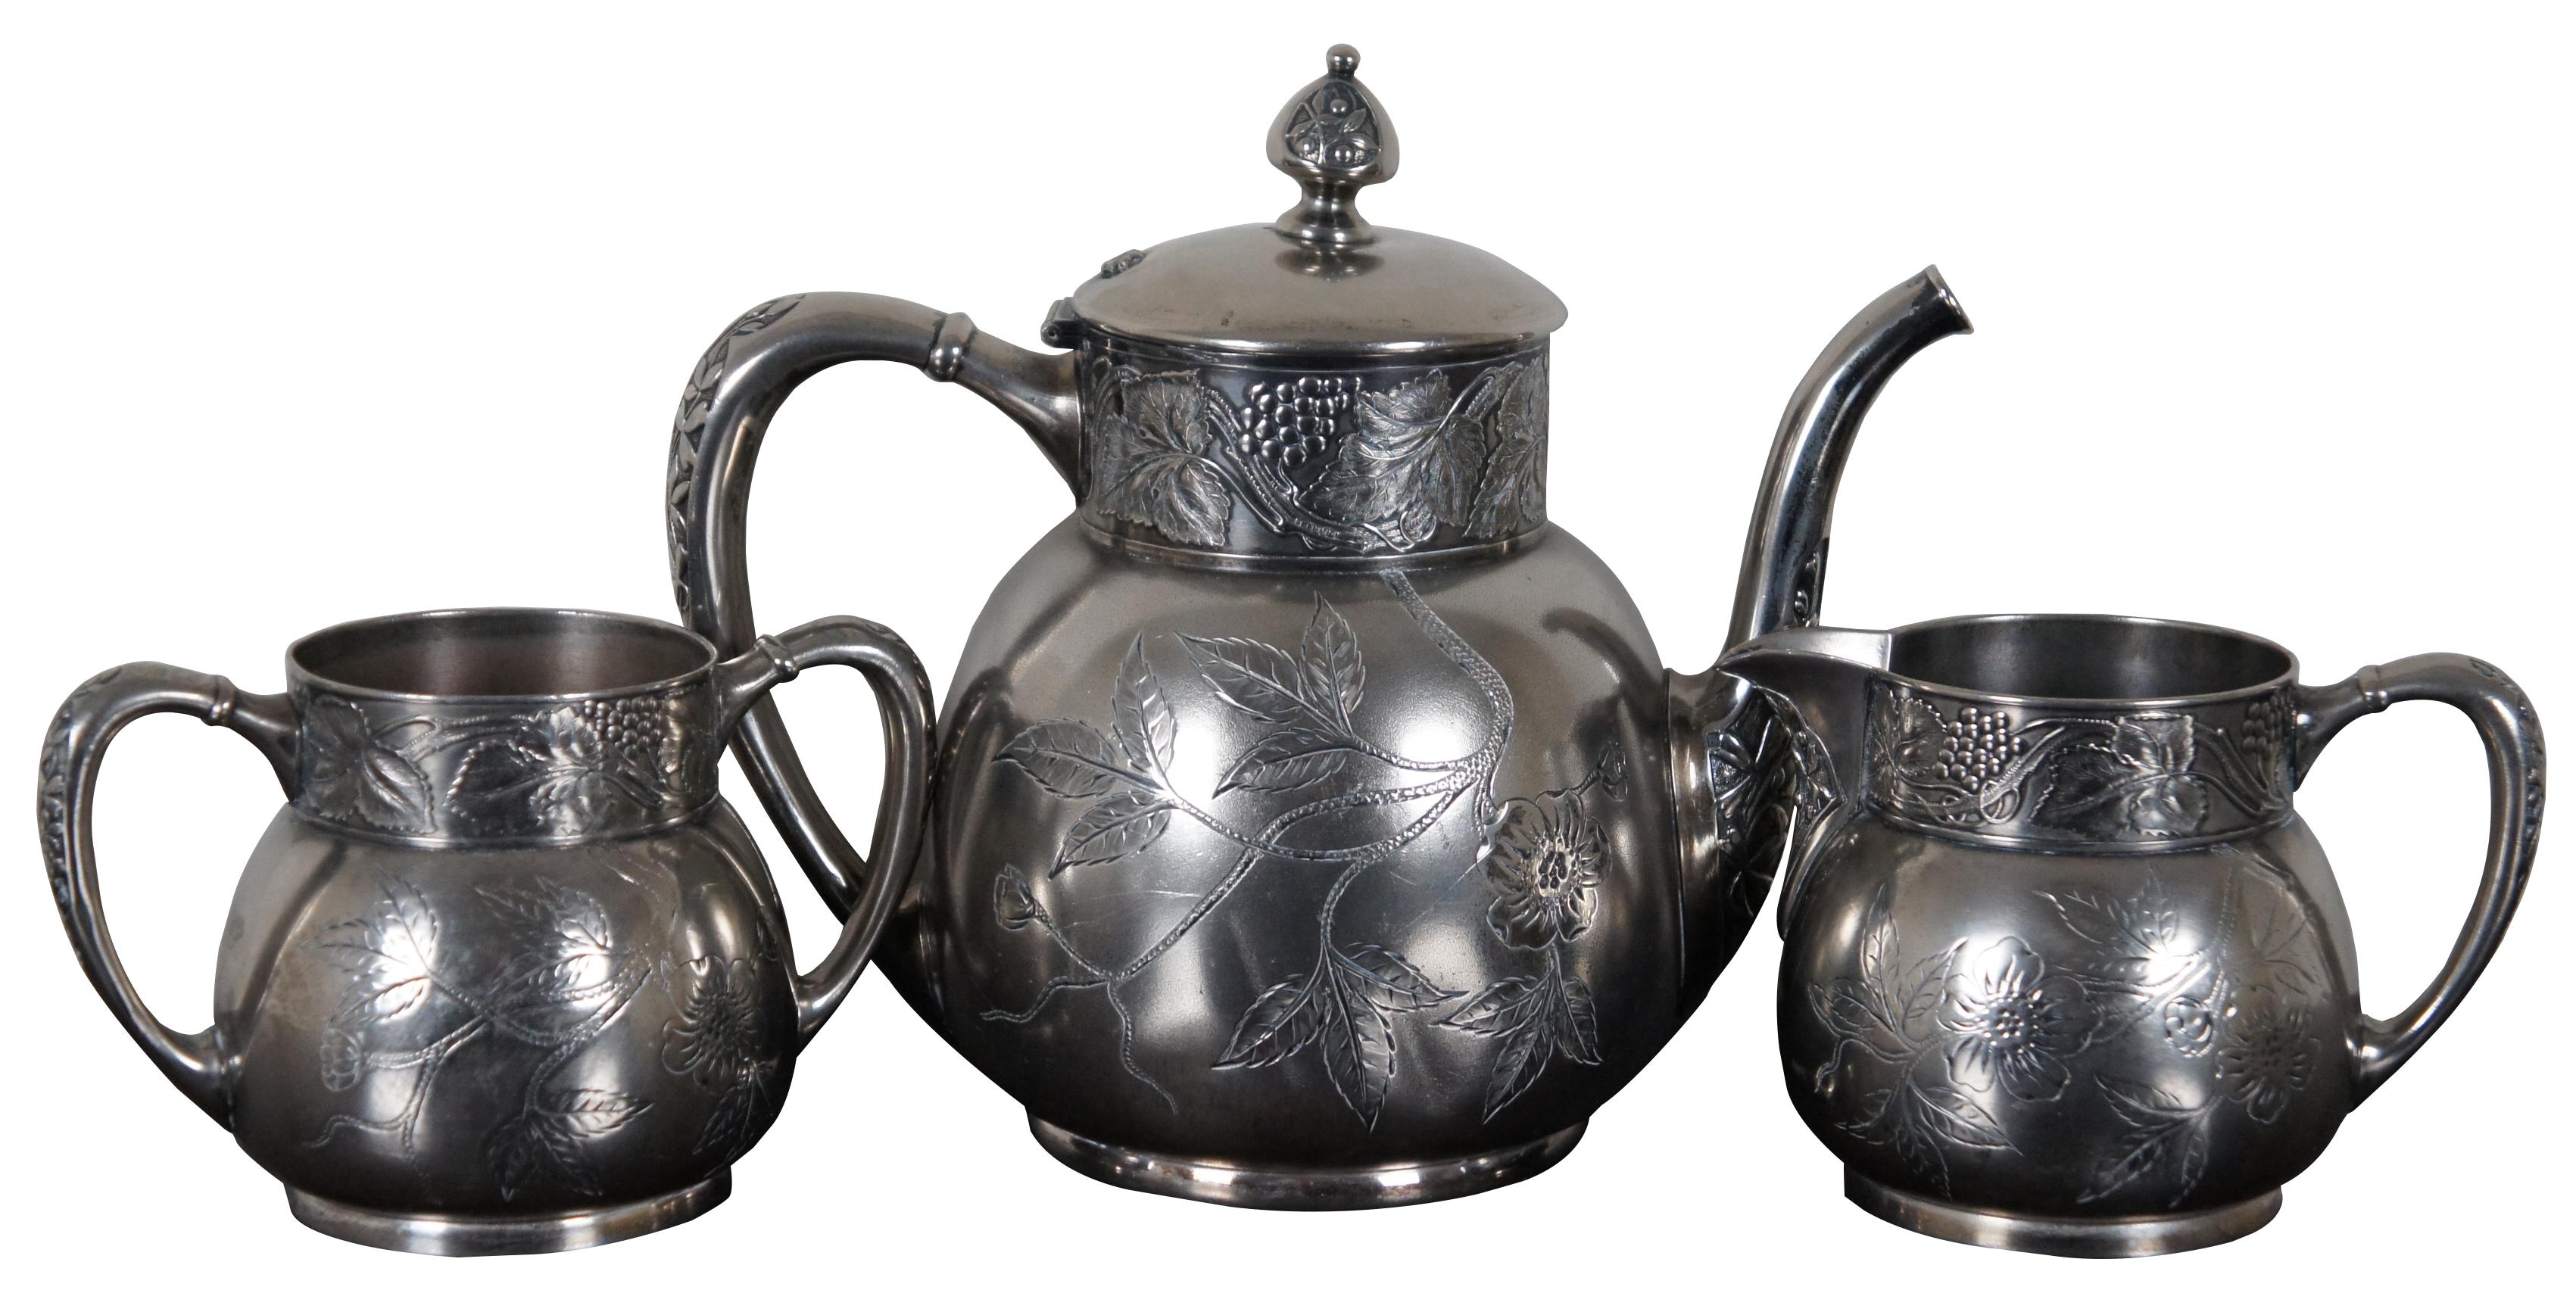 Antique quadruple silver plate three piece tea set by the Pairpoint Manufacturing Co. of New Bedford Massachusettes. 324.

Measures: 9.5” x 5.5” x 8” / Sugar Bowl - 6.25” x 4” x 4” / Creamer - 5.75” x 4” x 4” (width x depth x height).
  